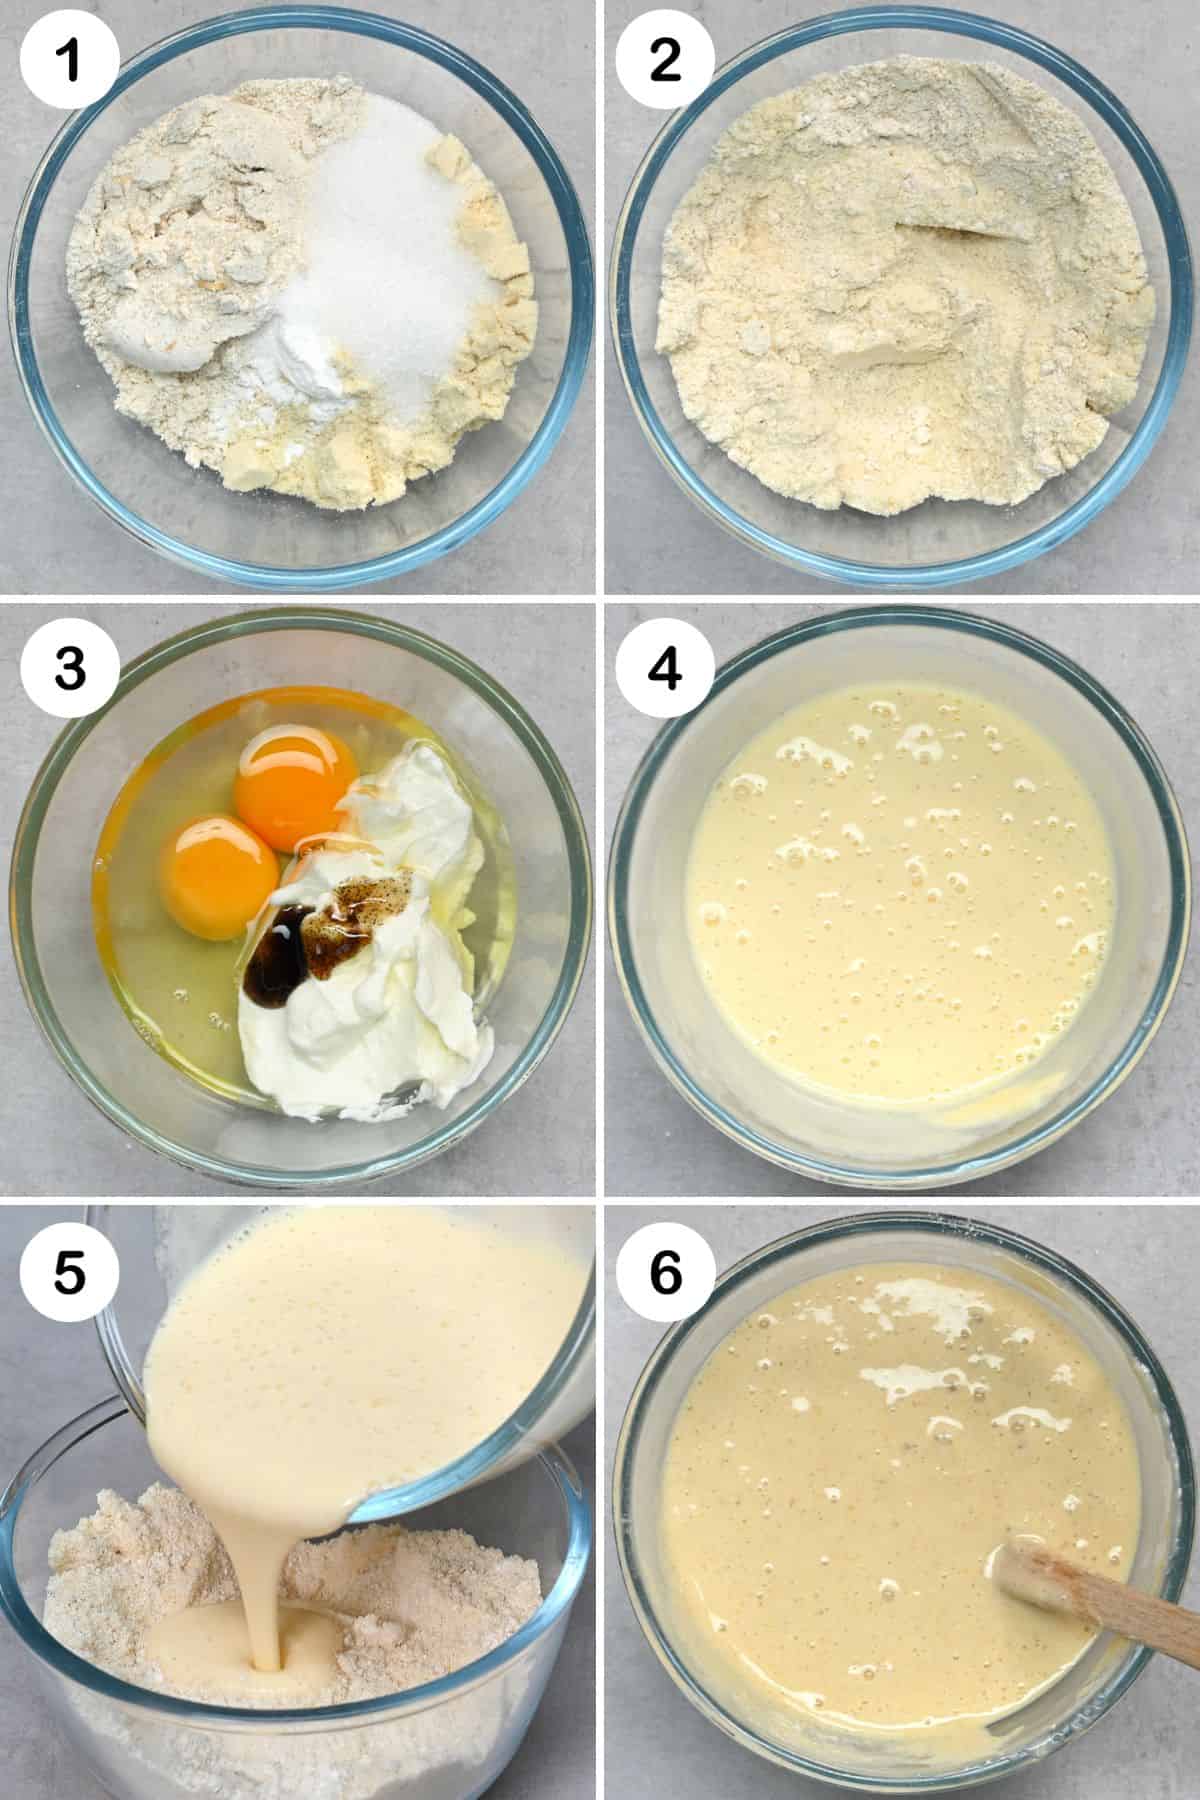 Steps for making protein pancakes batter